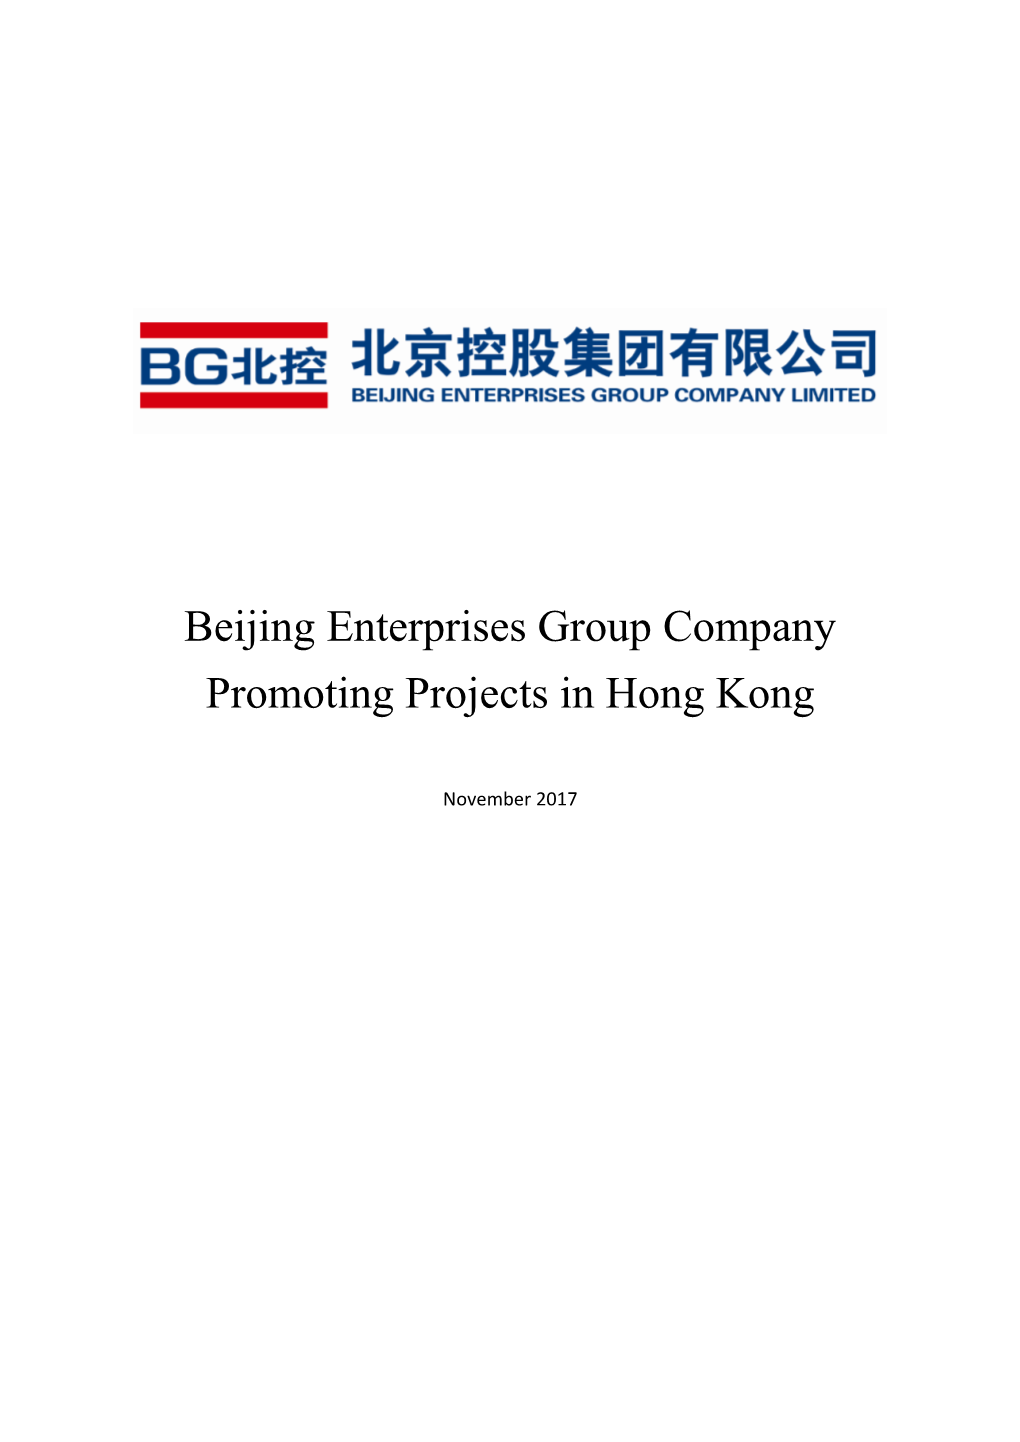 Beijing Enterprises Group Company Promoting Projects in Hong Kong